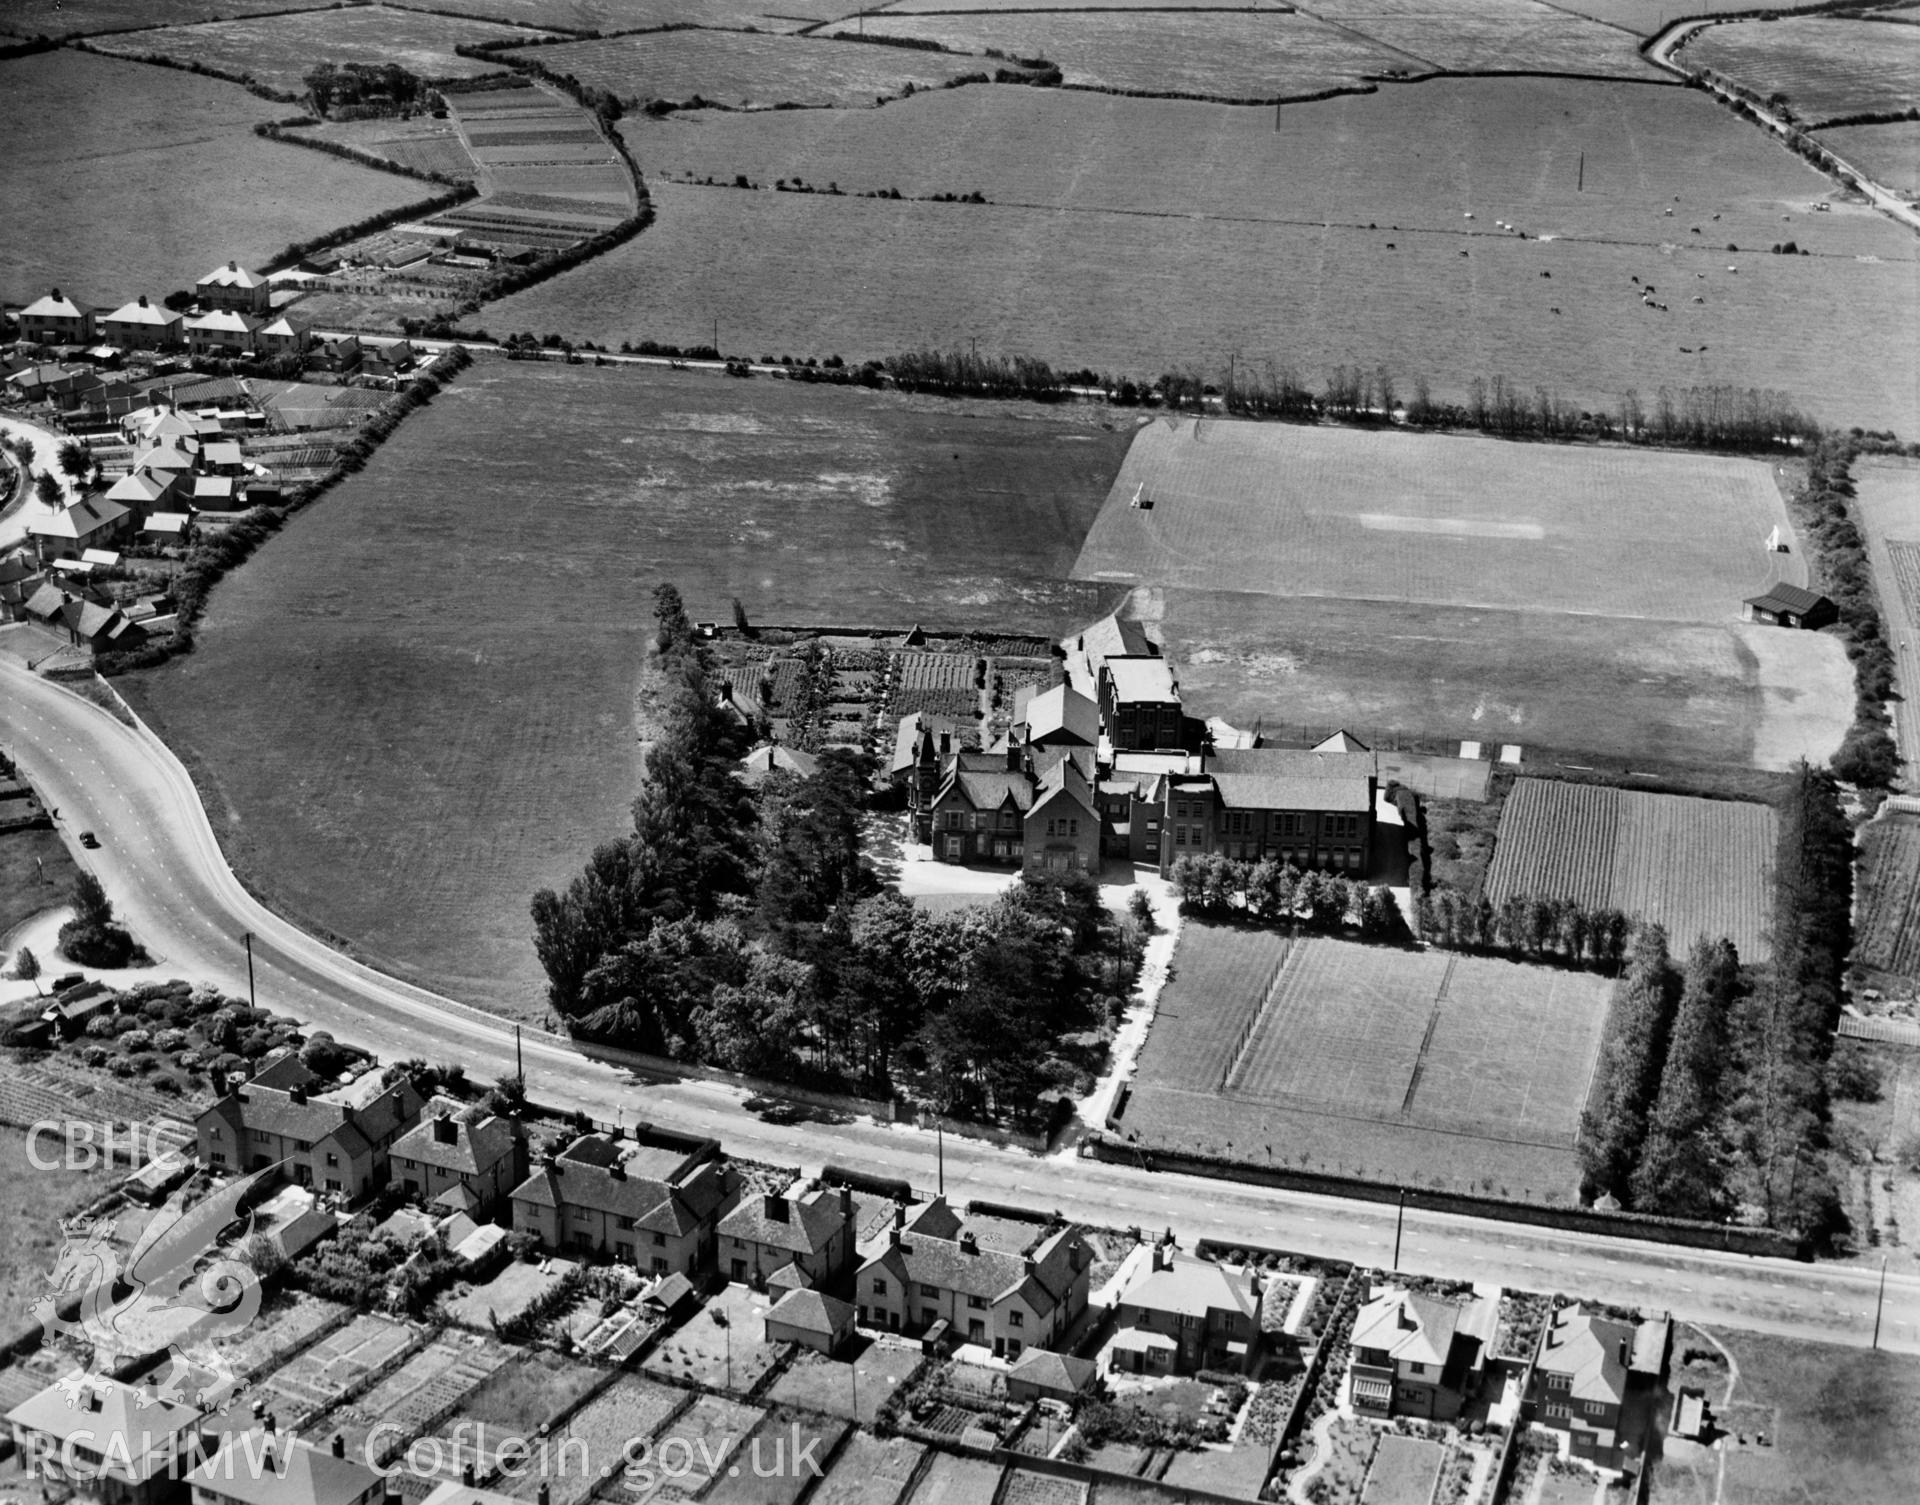 View of Epworth College, Rhyl, oblique aerial view. 5?x4? black and white glass plate negative.